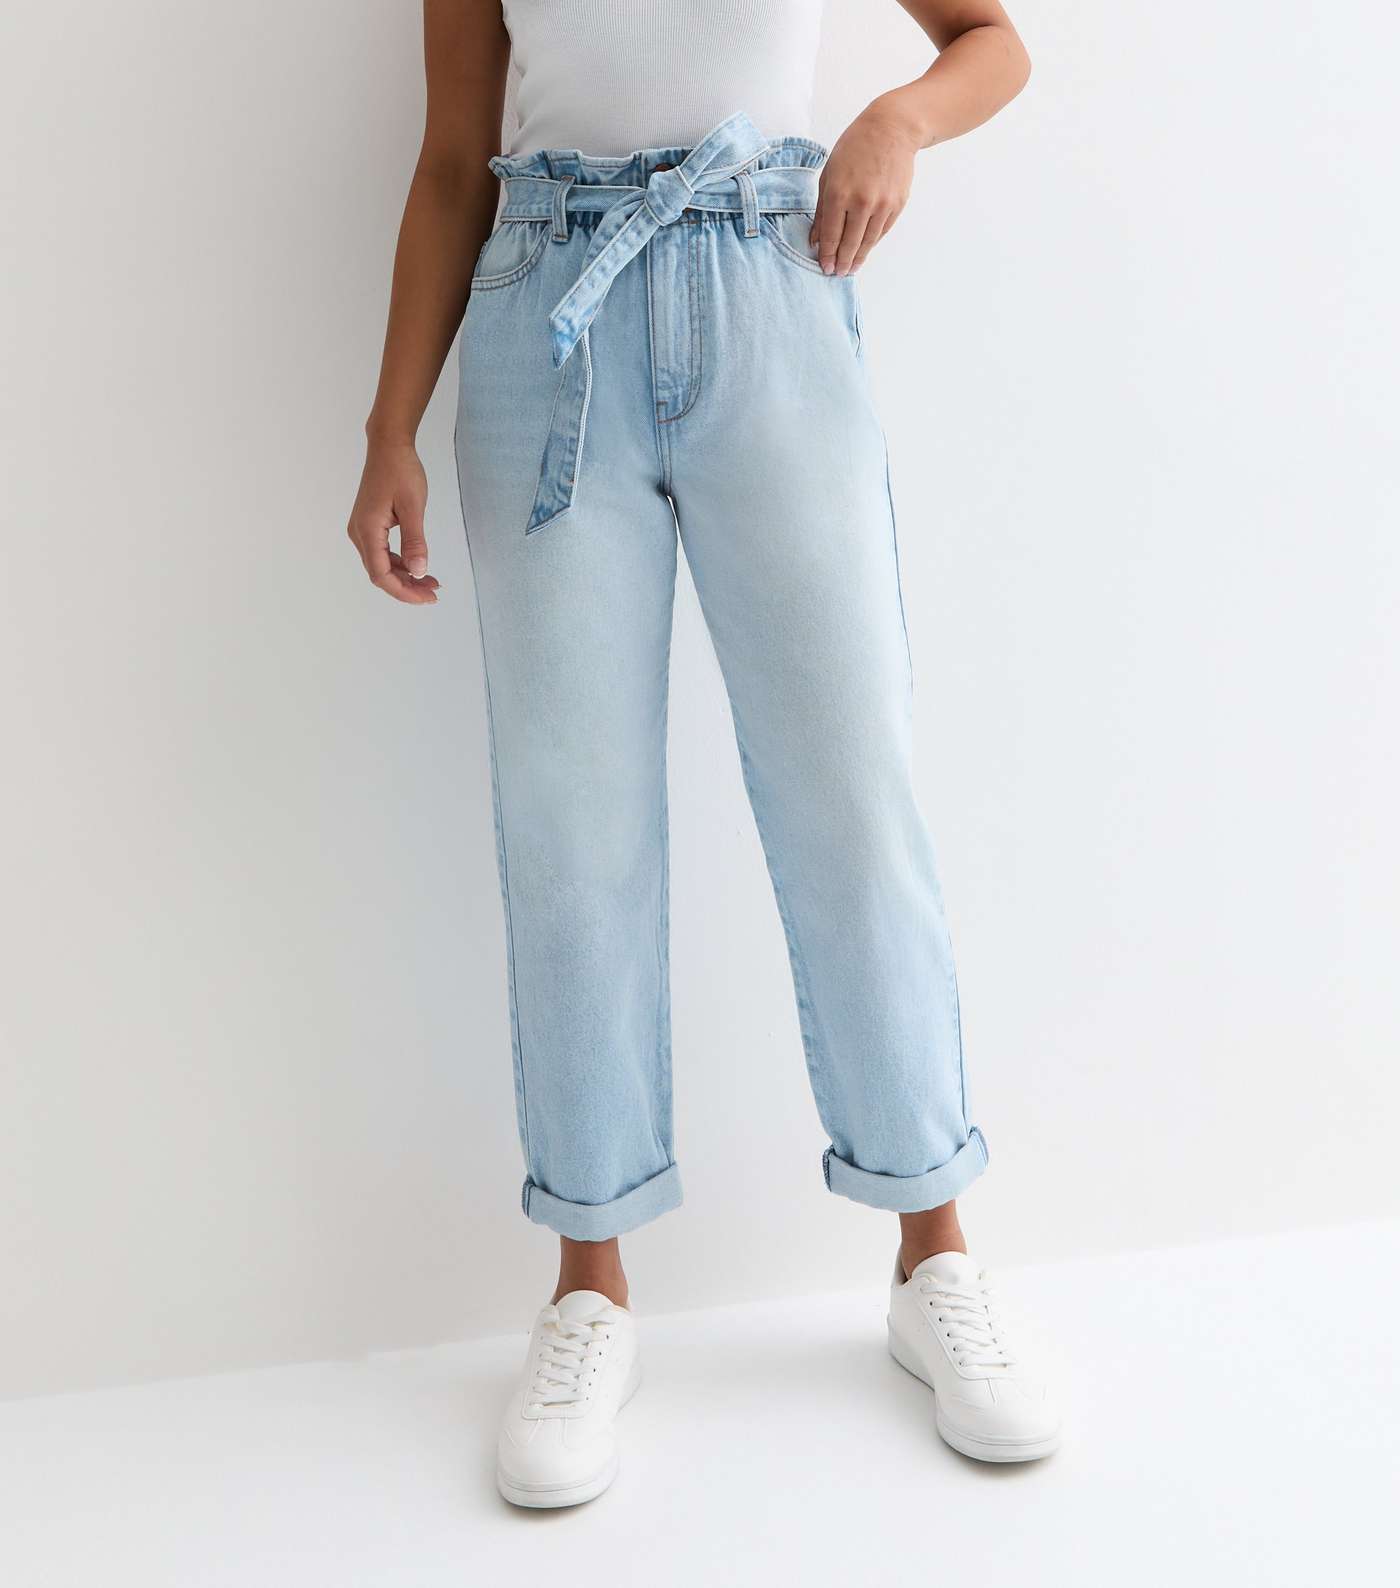 Petite Bright Blue Paperbag High Waist Dayna Tapered Jeans Image 3